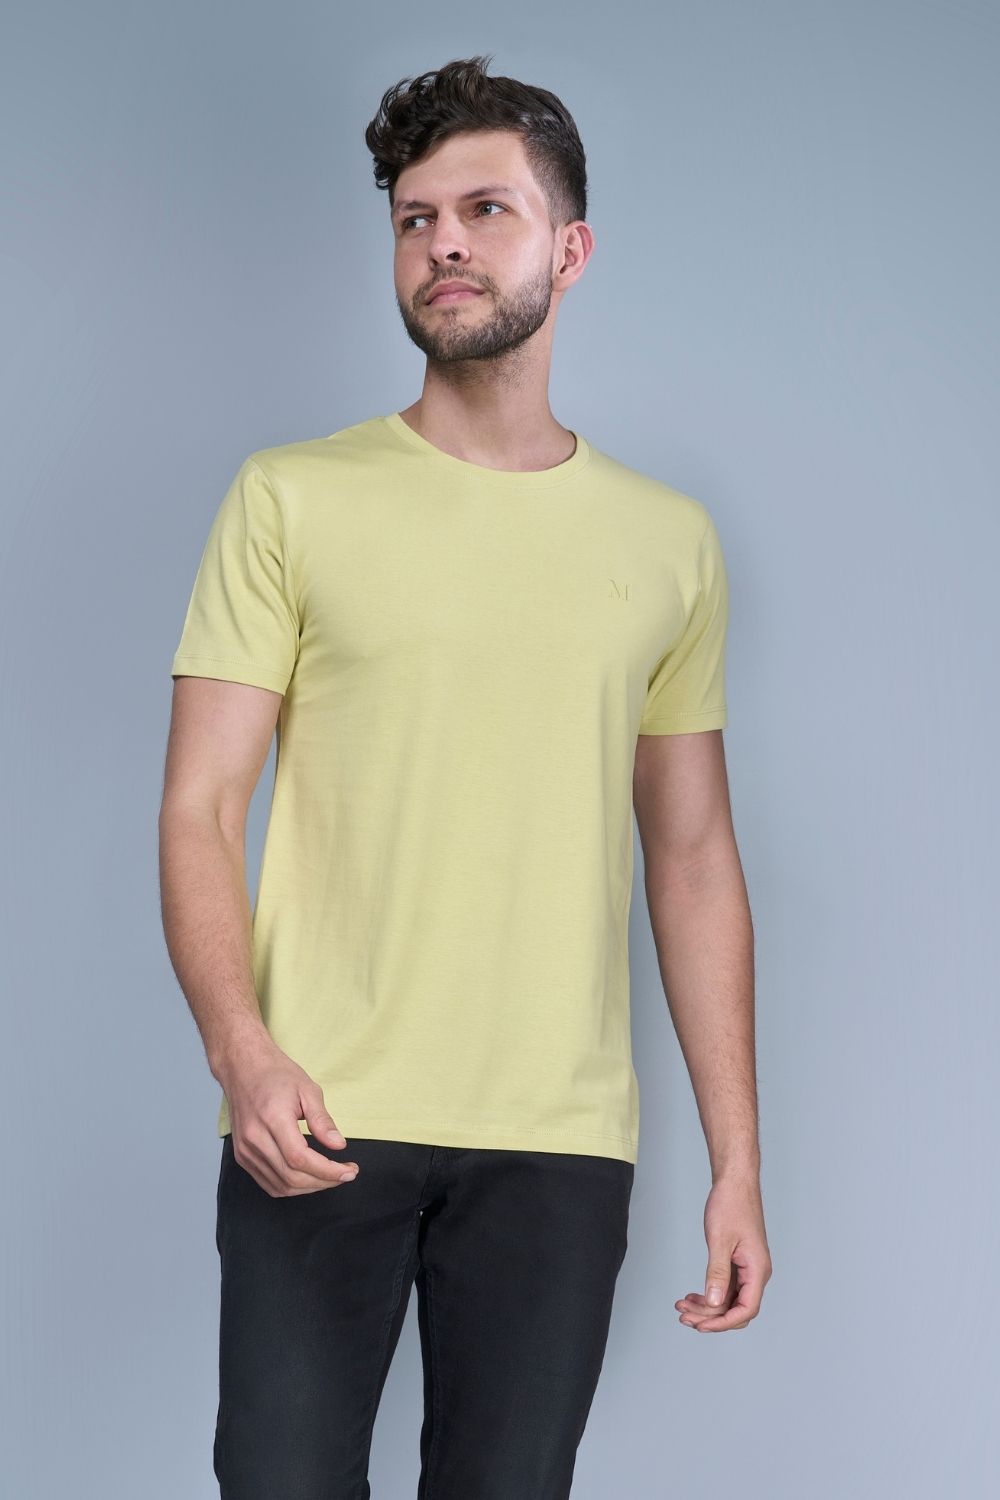 Lemon green colored, Solid T shirt for men, with half sleeves and round neck, full view.